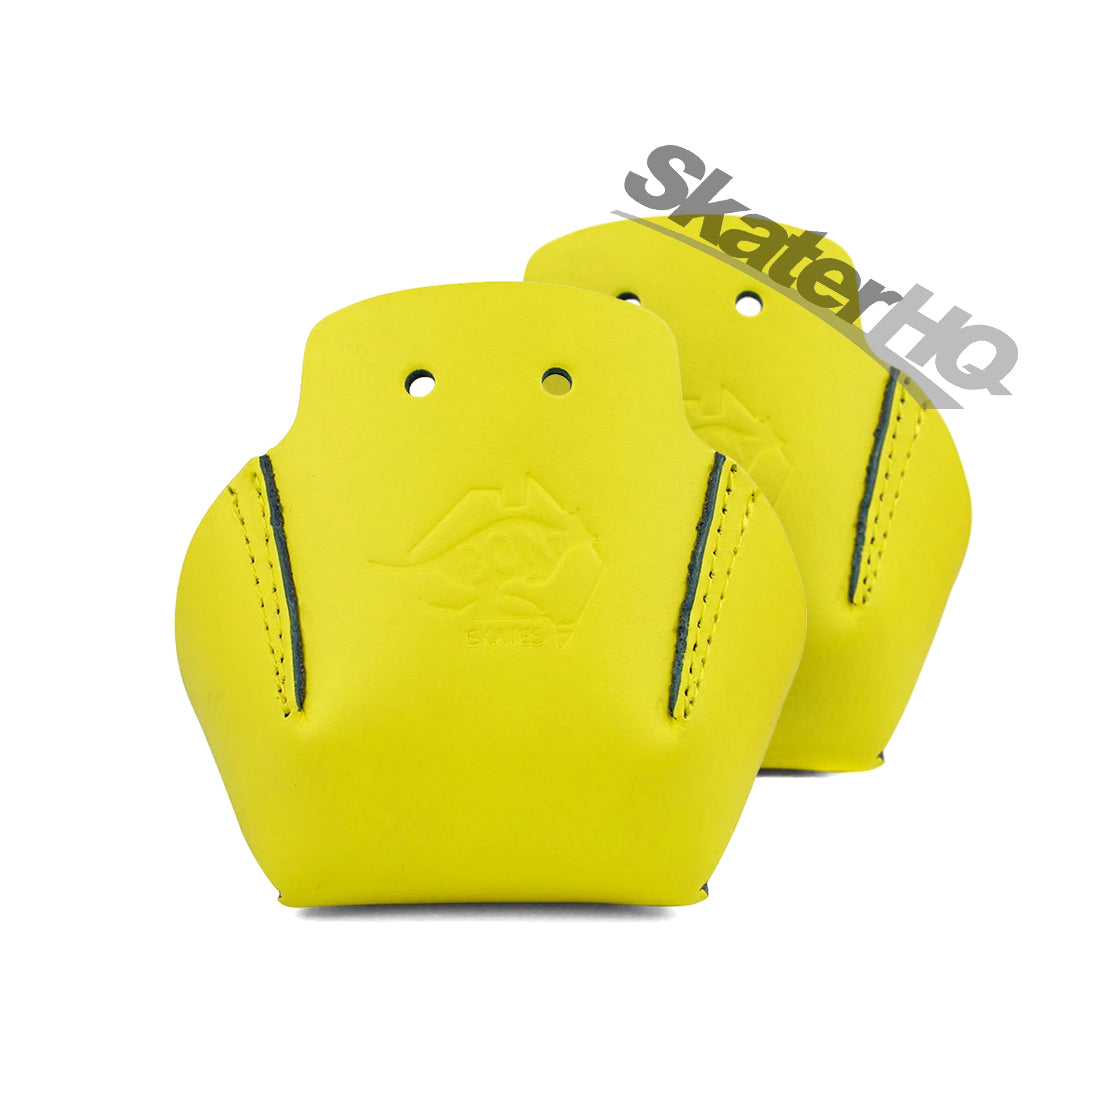 BONT Stitched Toe Cap Pair - Super Yellow Roller Skate Hardware and Parts